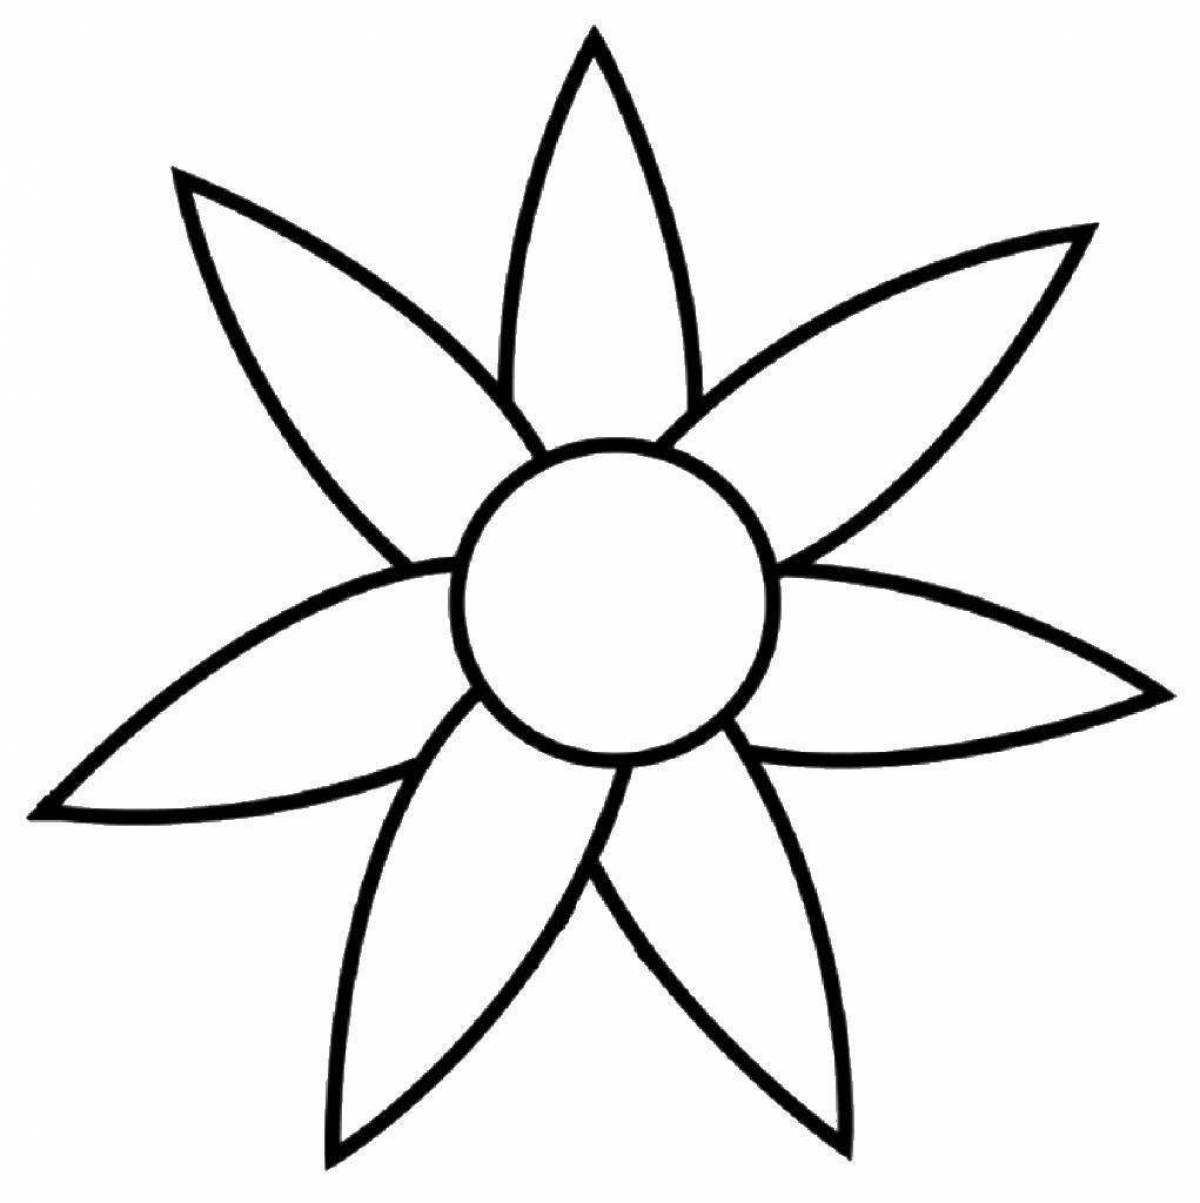 Fantastic coloring book template flower with seven colors